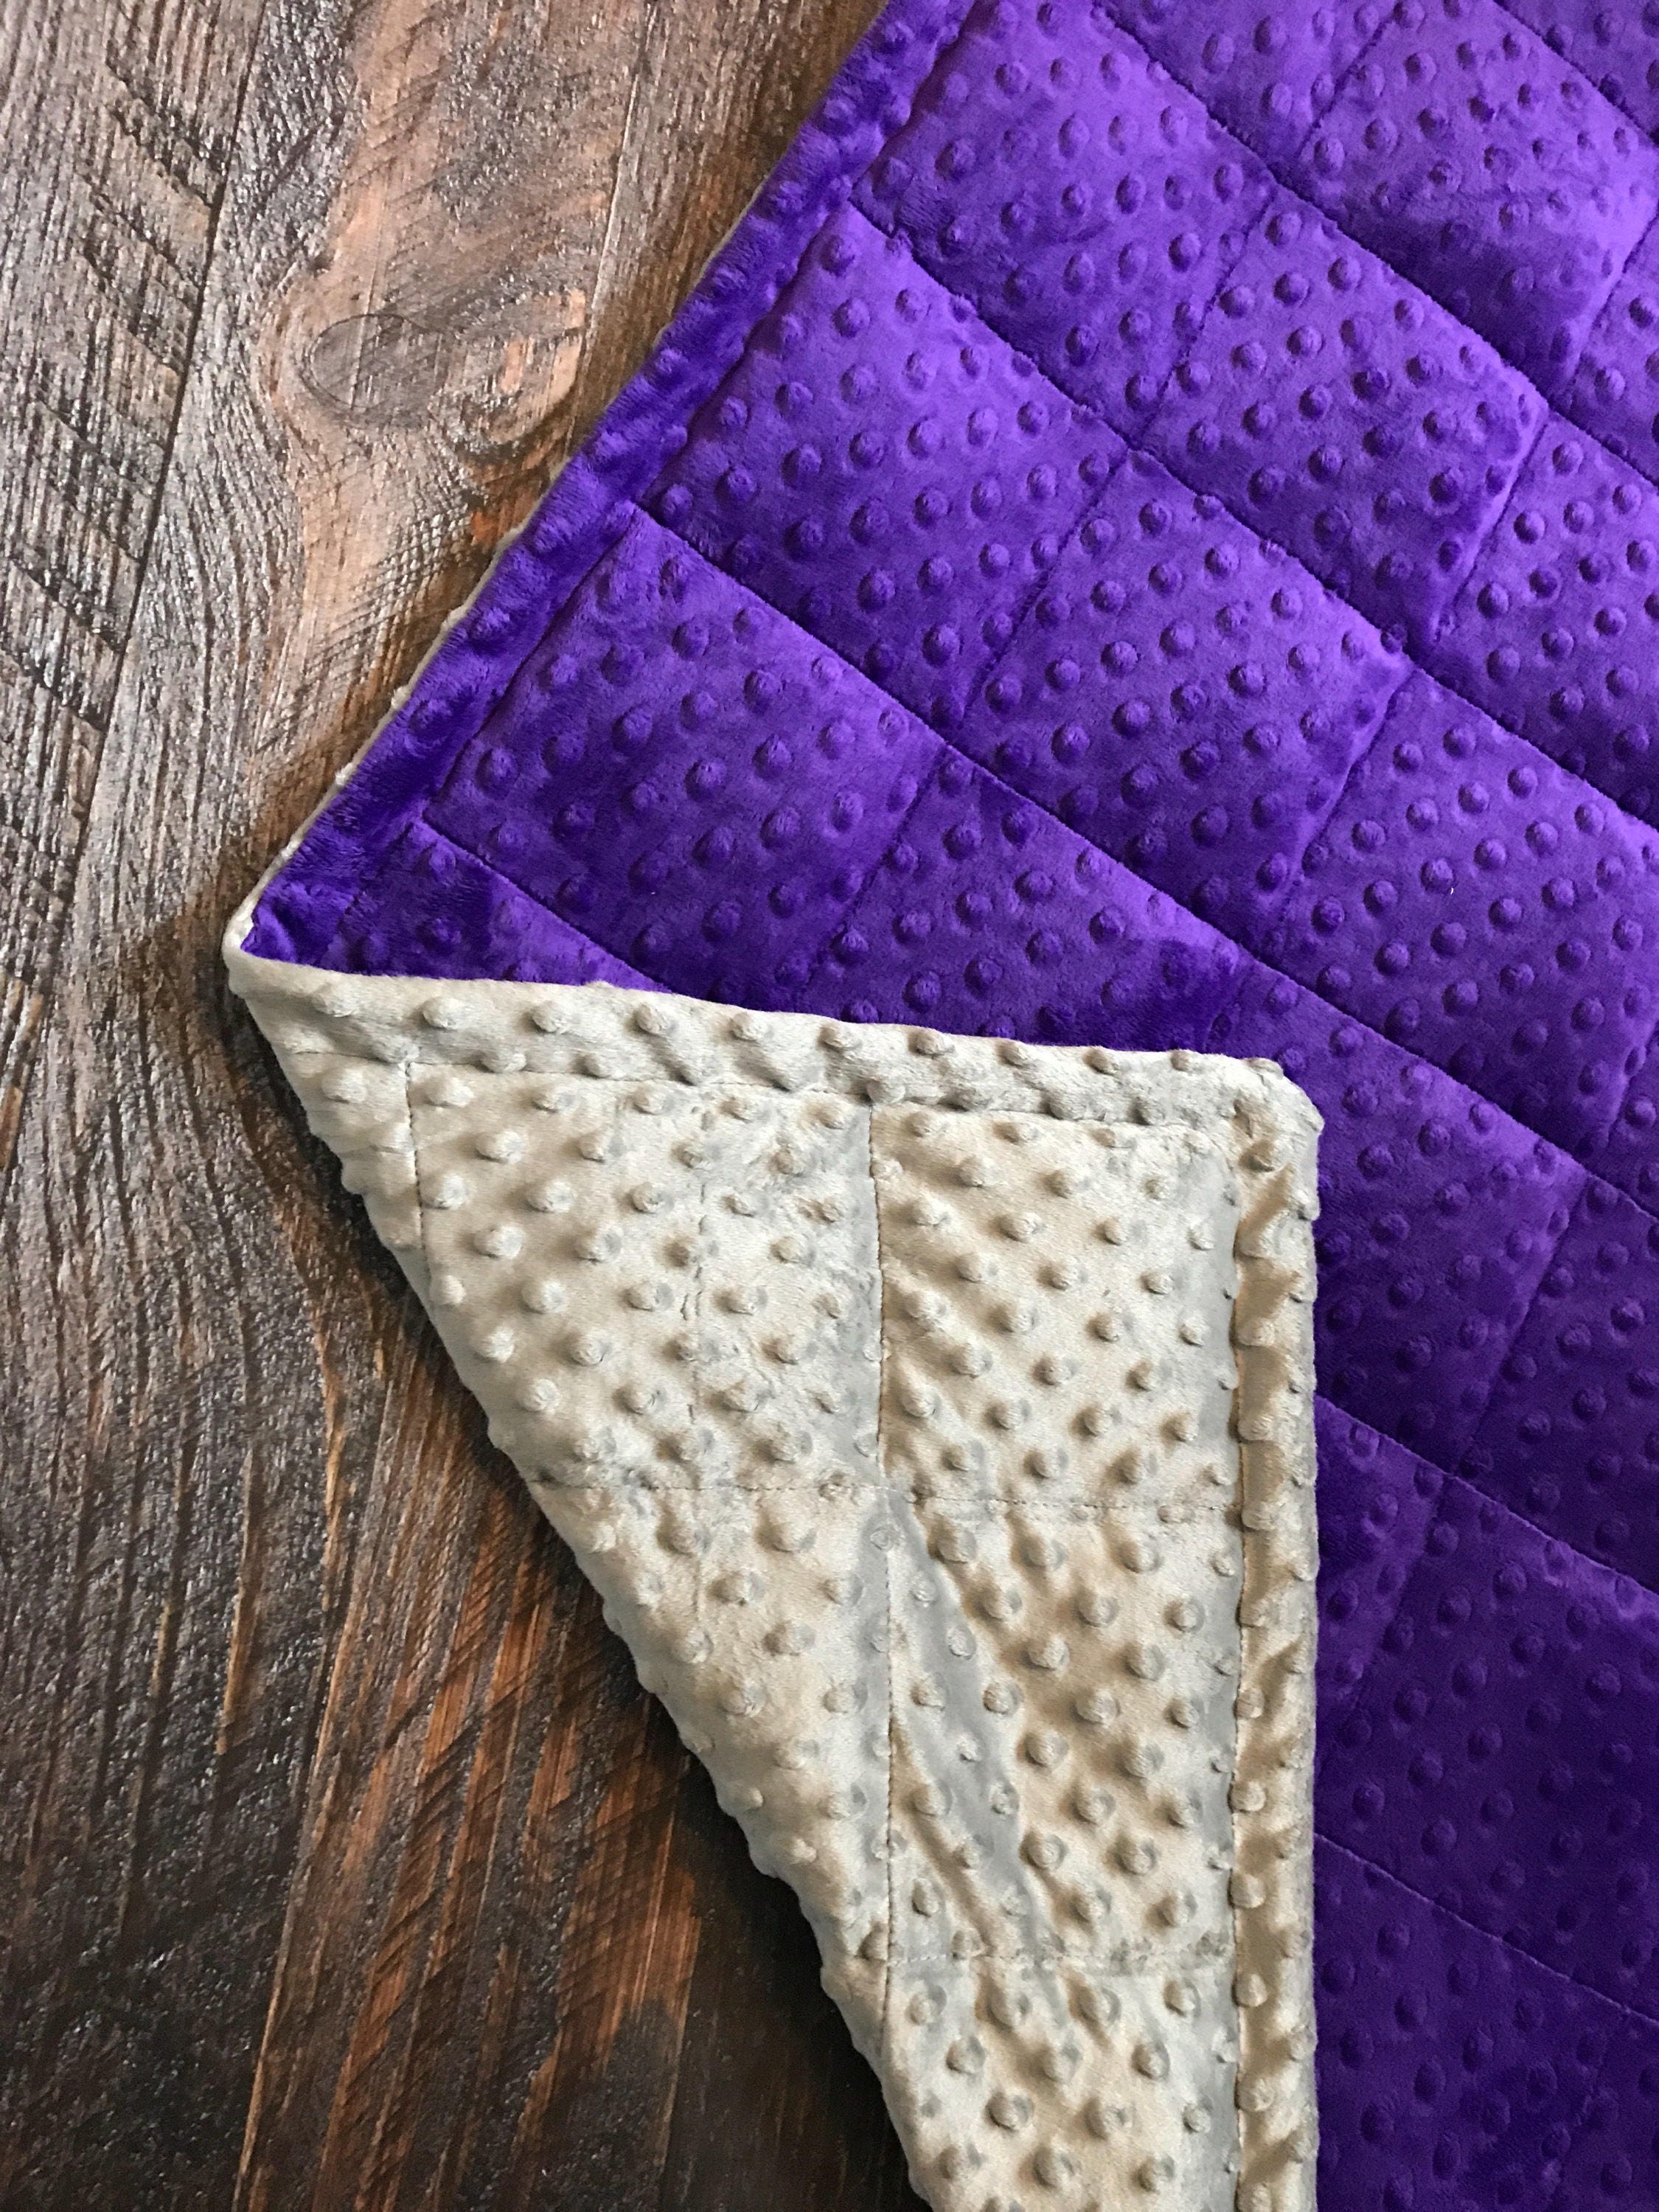 Weighted blanket. Purple/Grey minky weighted blanket. | Etsy